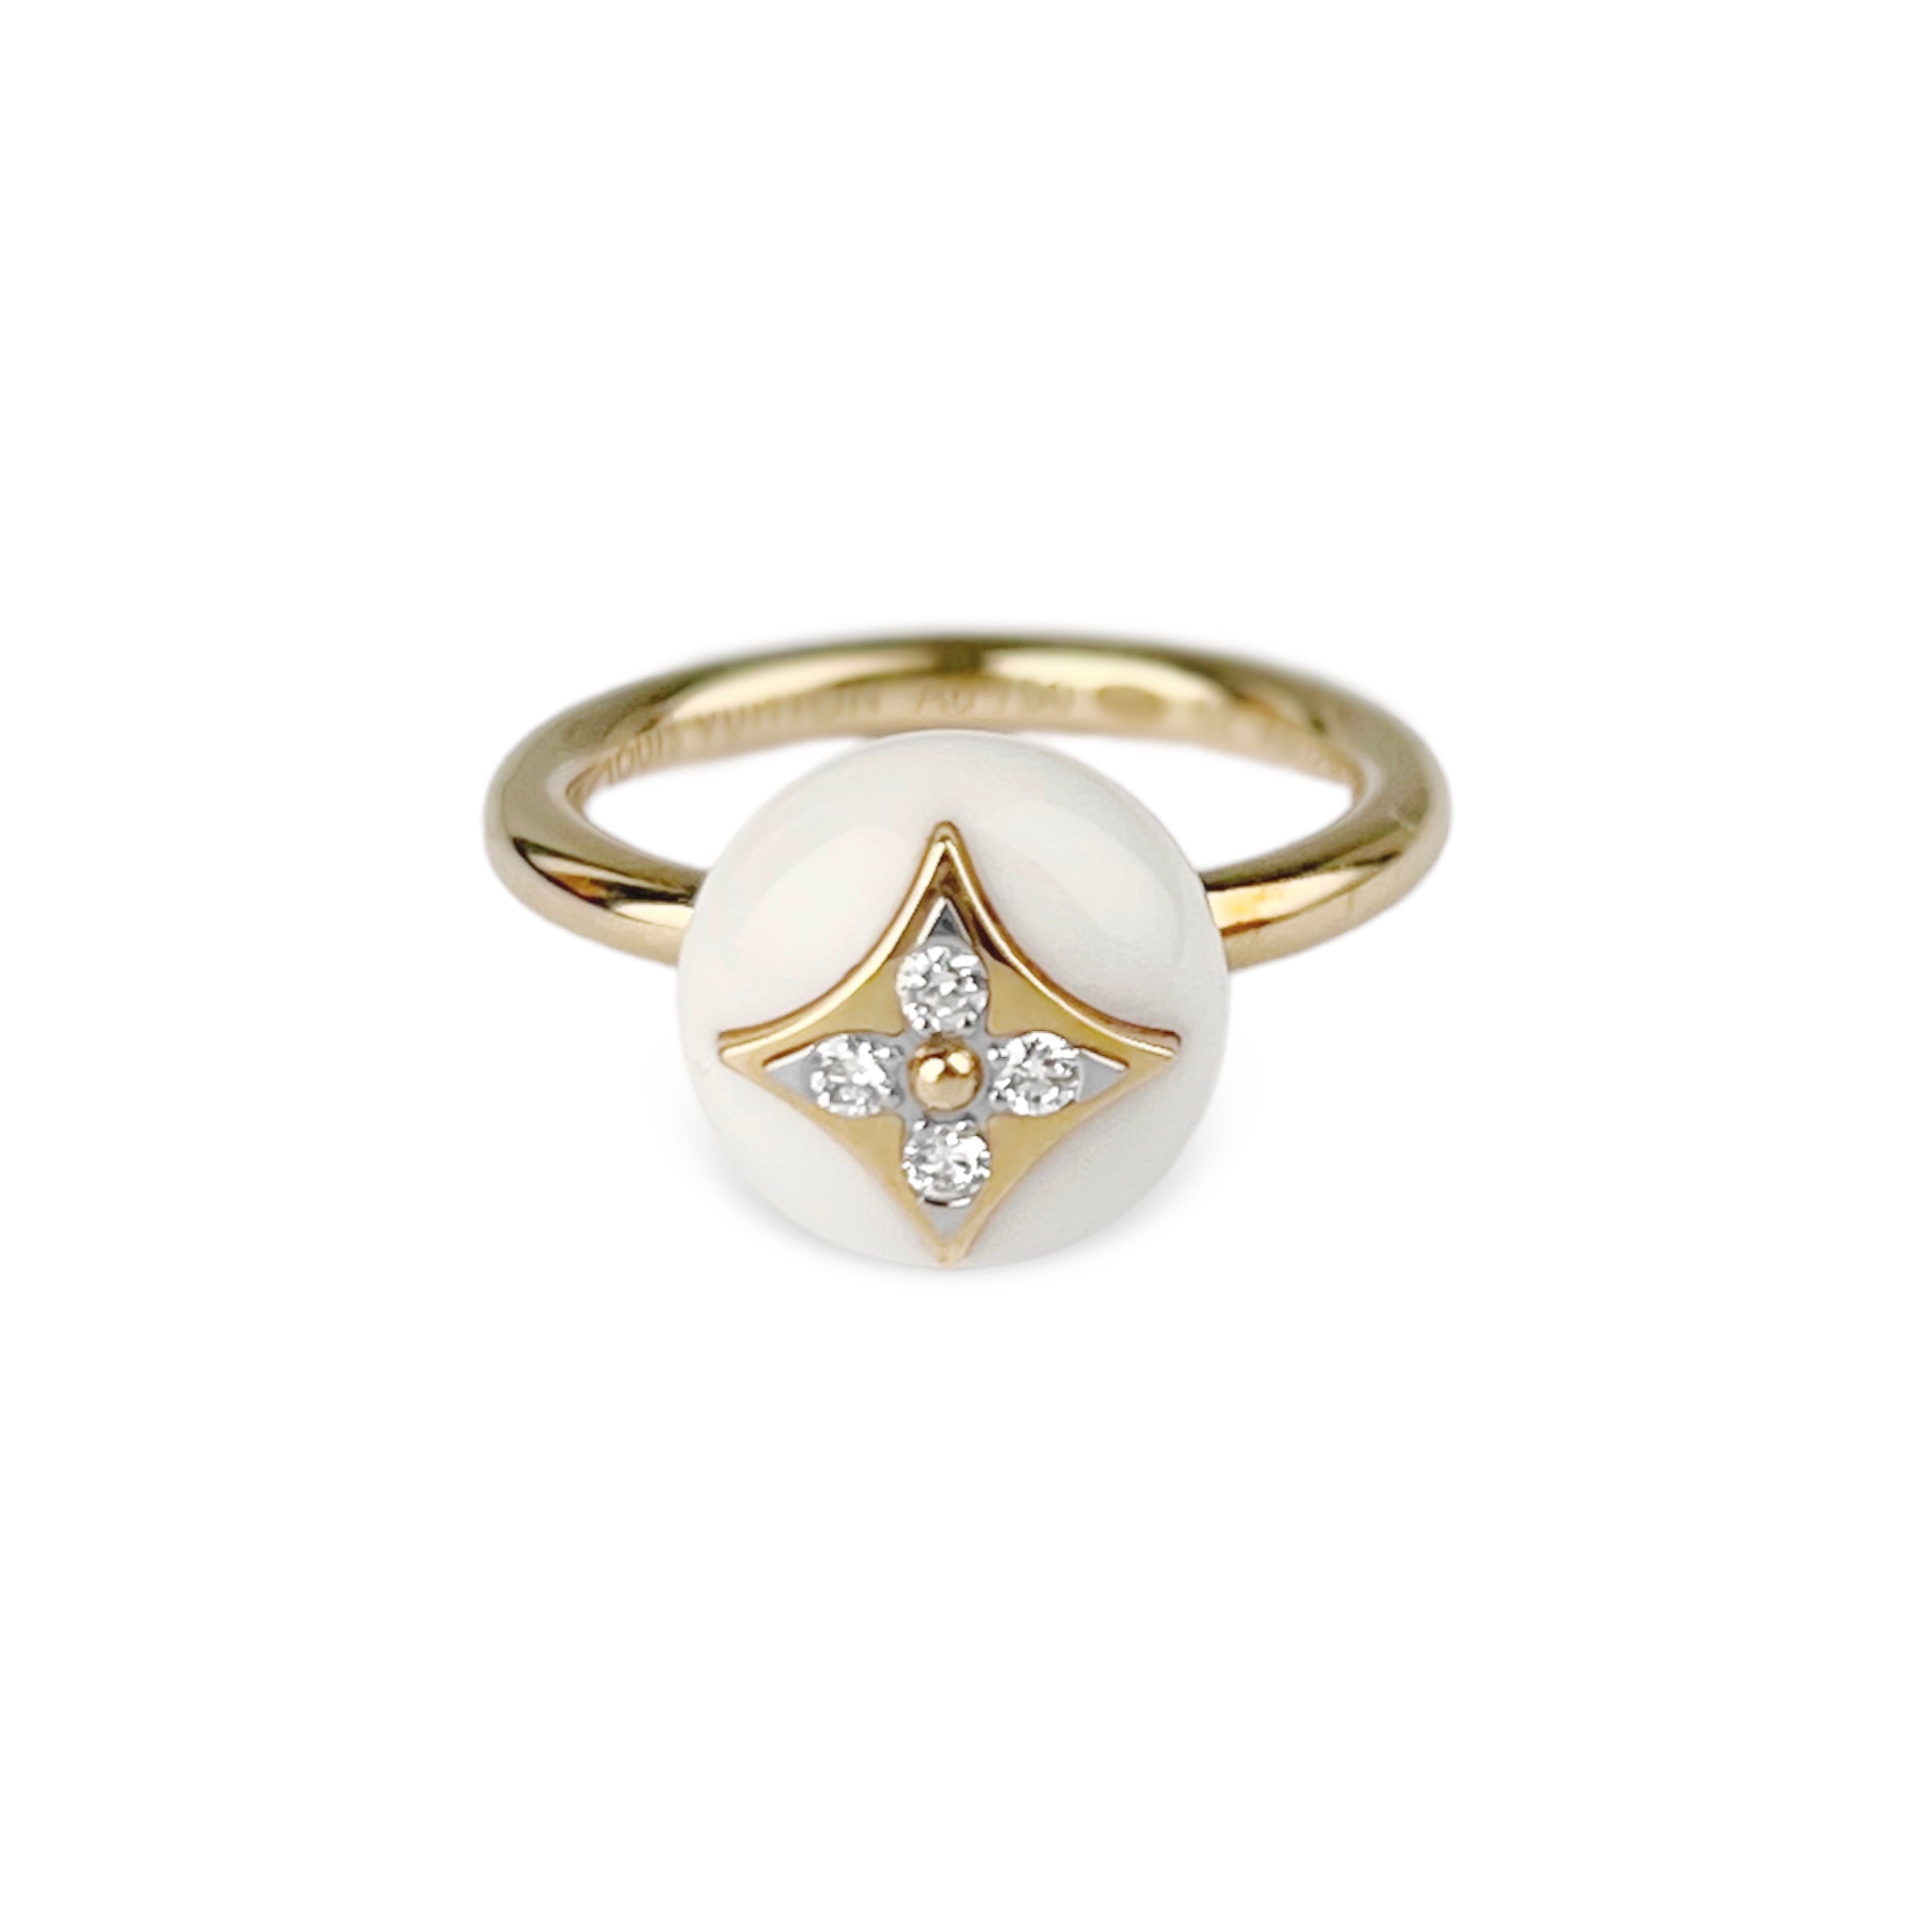 Louis Vuitton Color Blossom Ring, Yellow and White Gold, White Agate and Diamonds Gold. Size 52